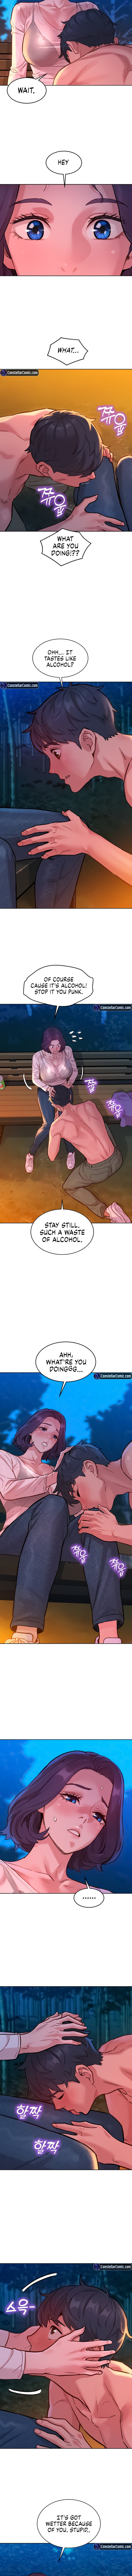 lets-hang-out-from-today-chap-39-2